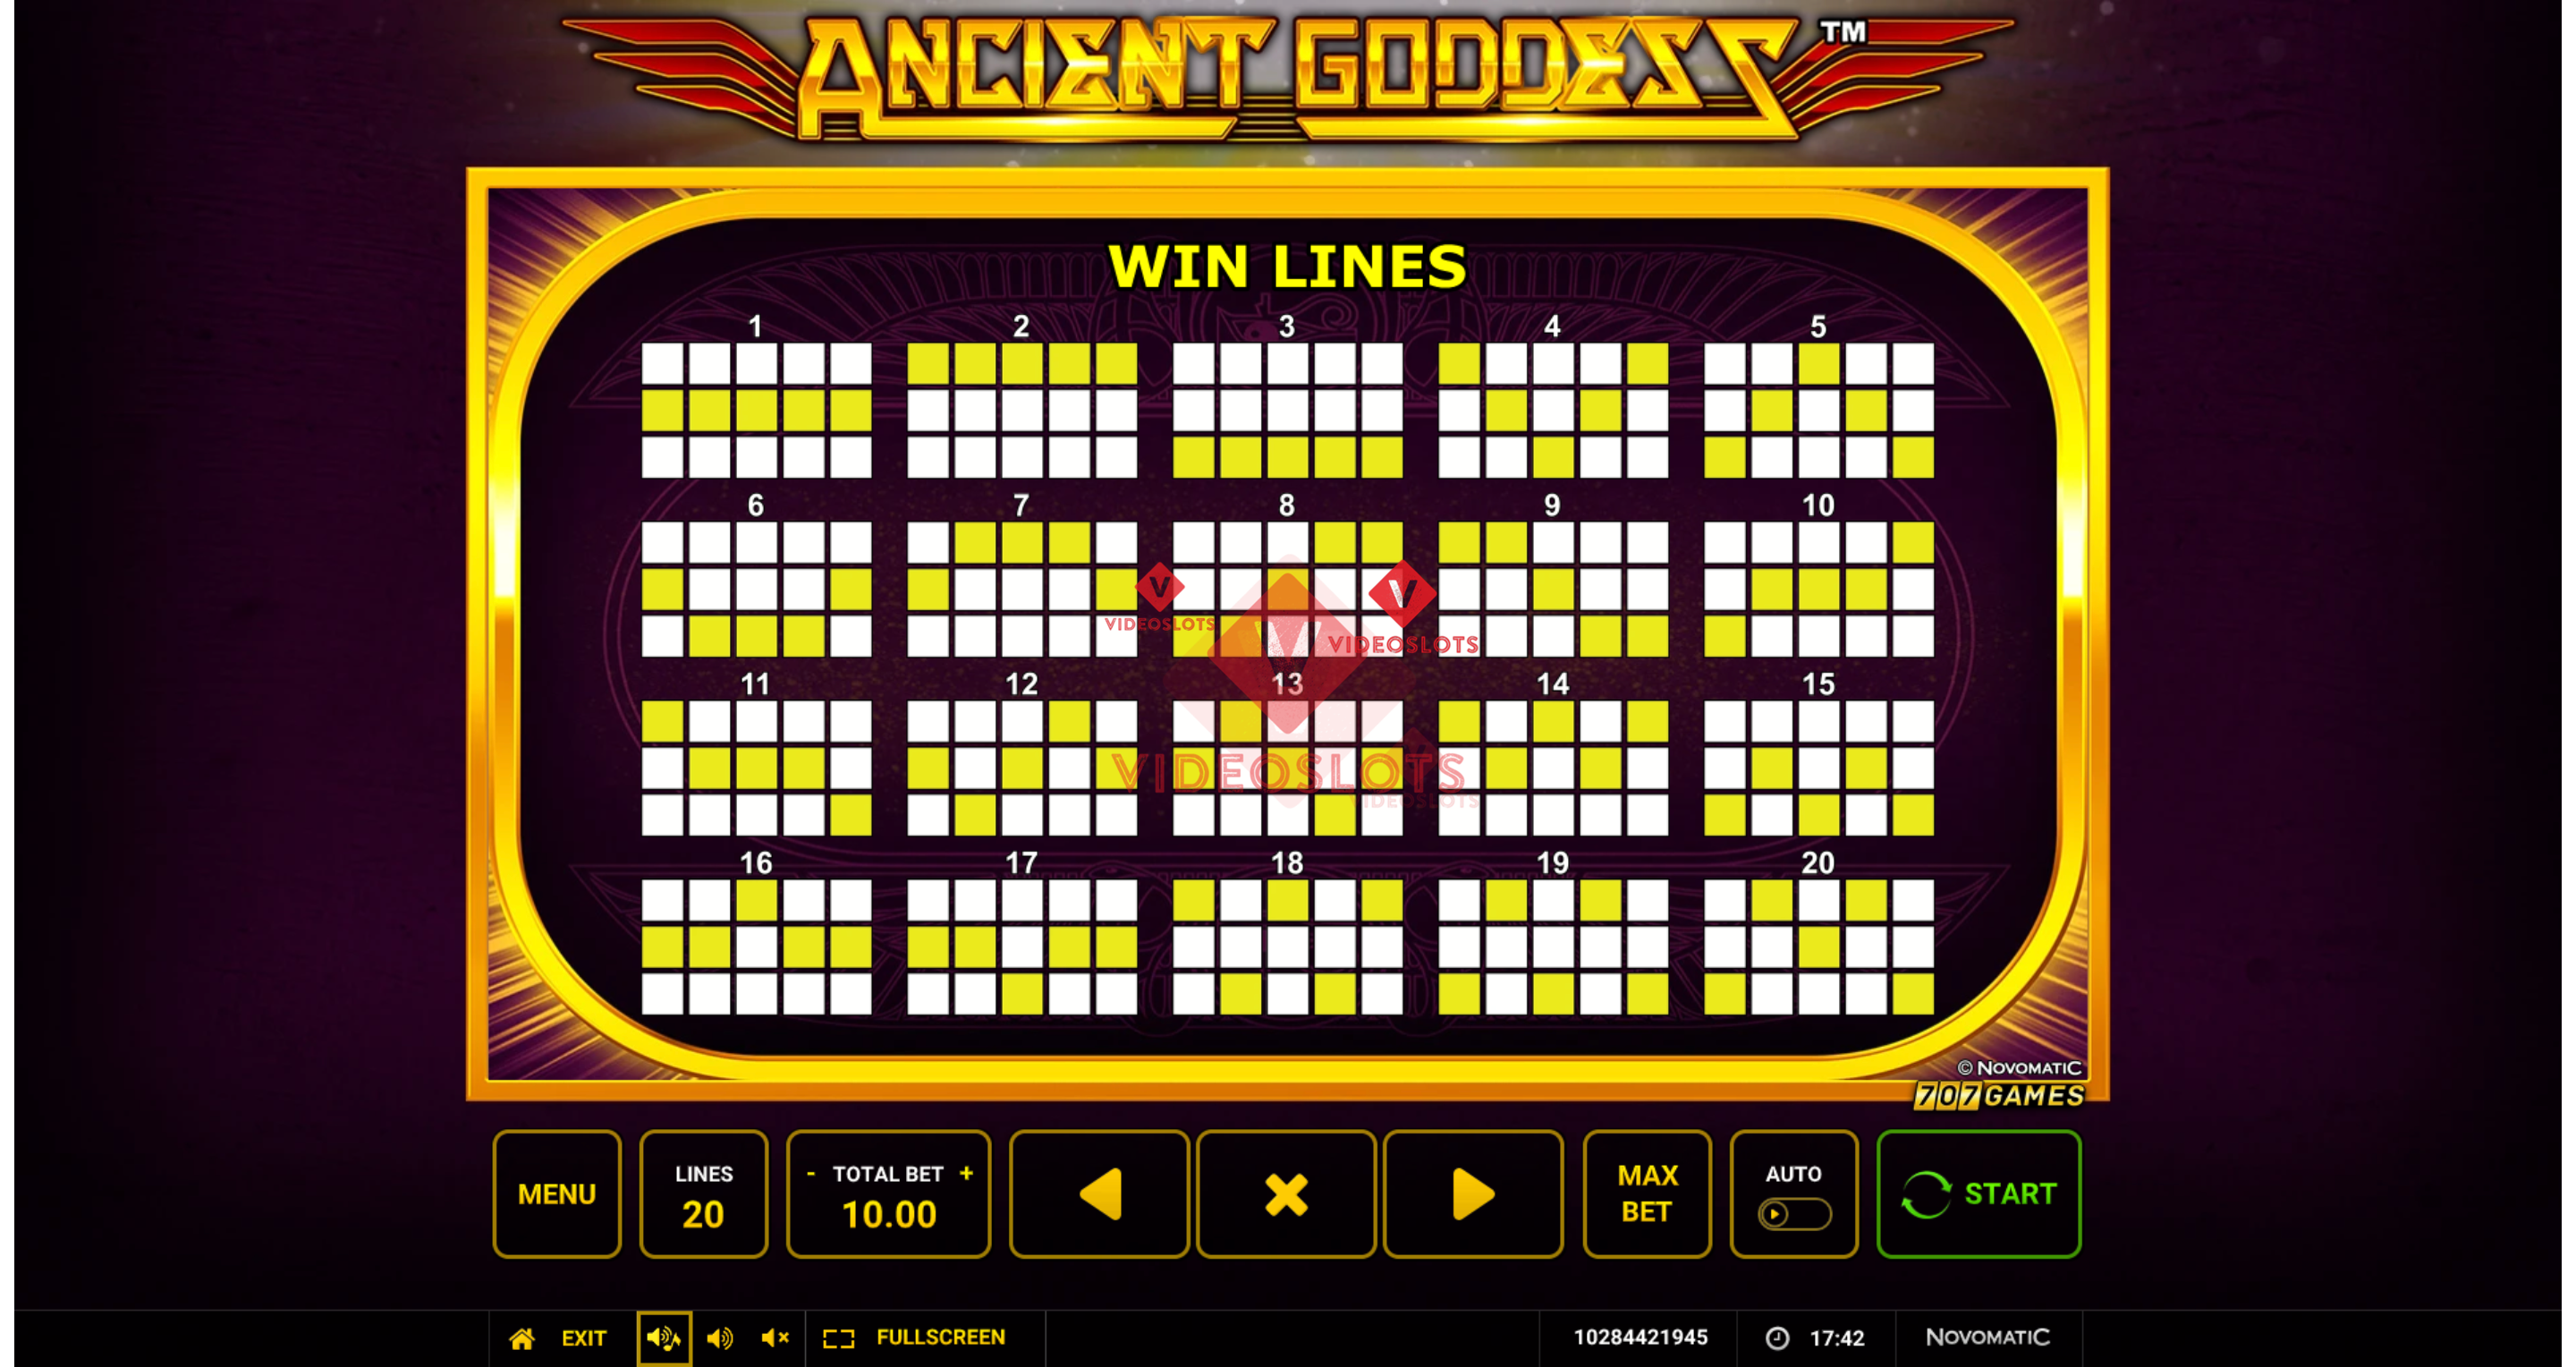 Pay Table for Ancient Goddess slot from Greentube